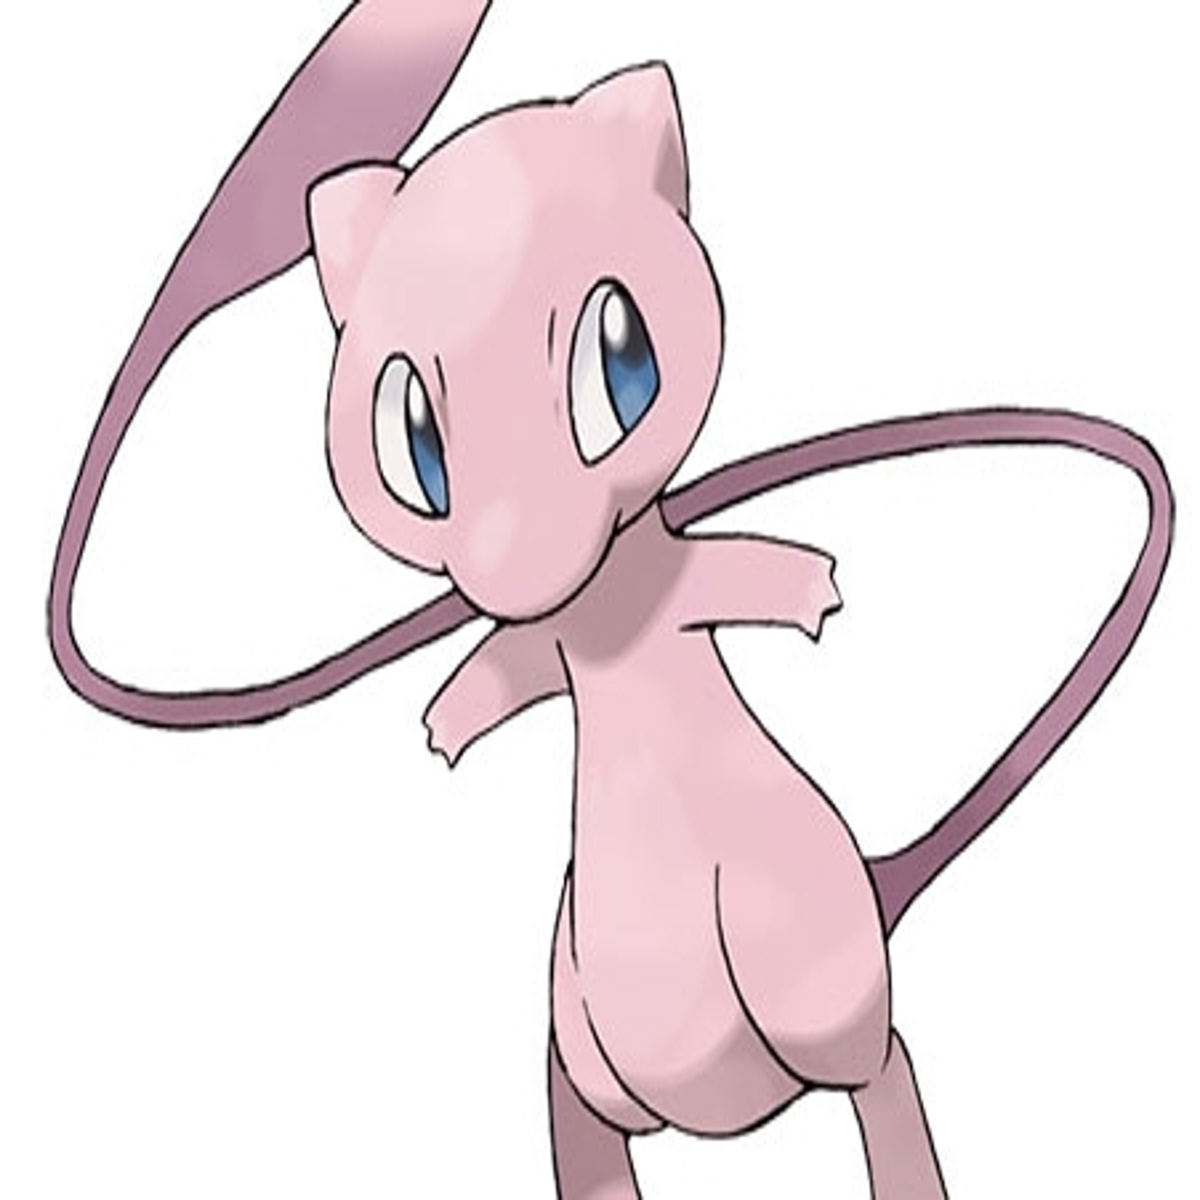 A Mew Distribution Has Begun For Pokémon Trainer Club Subscribers